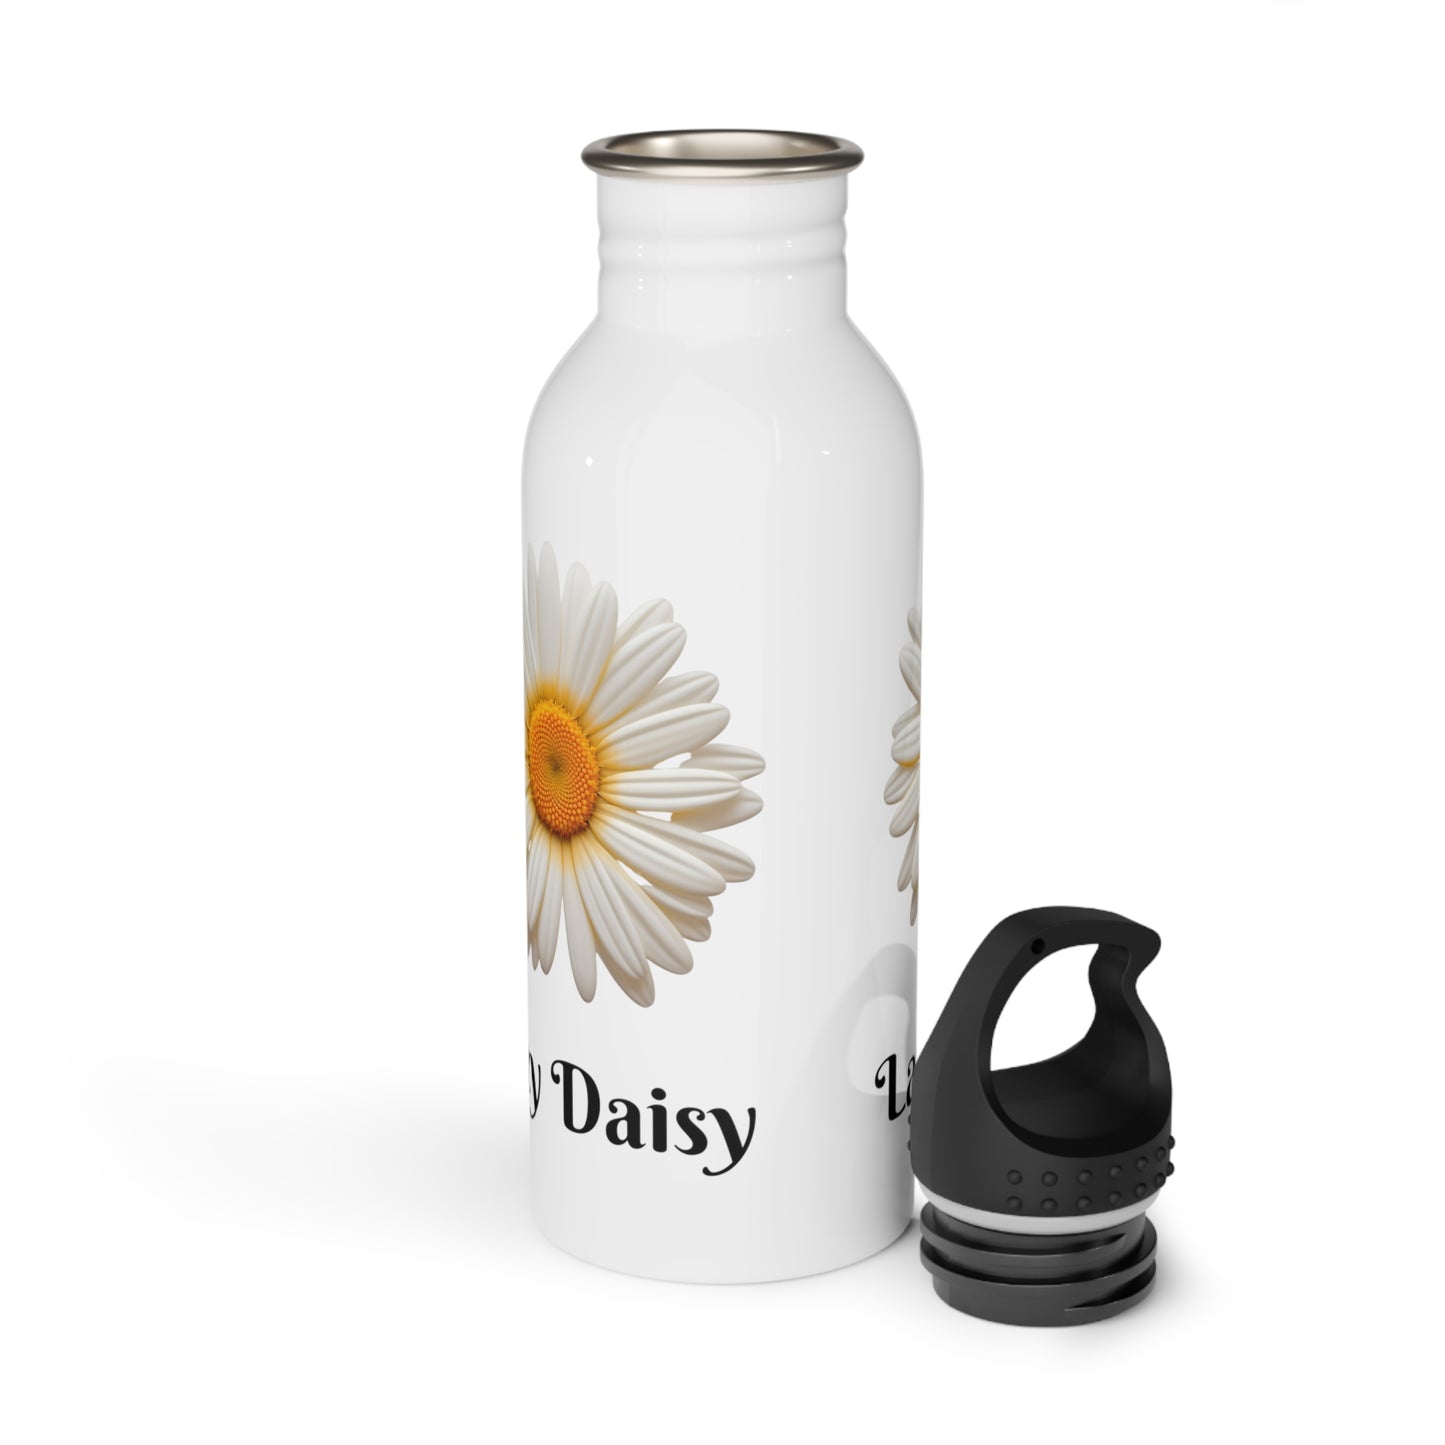 Whimsical Stainless Steel Water Bottle - Lazy Daisy